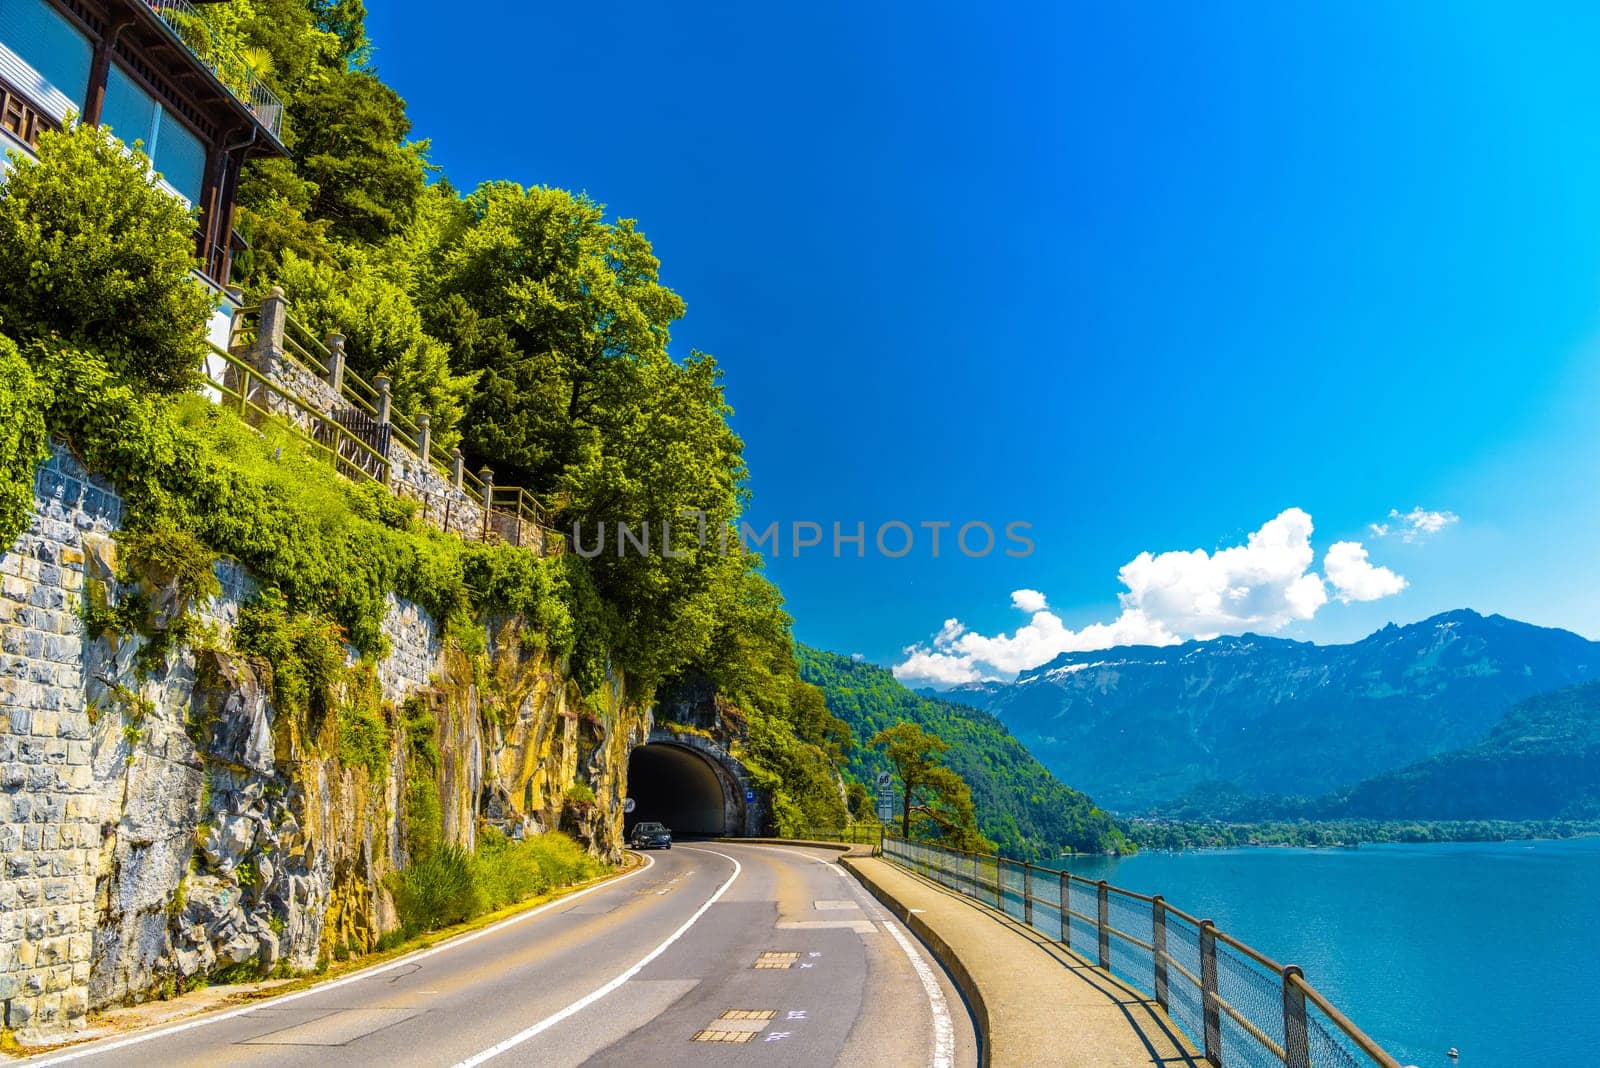 Lake Thun, road and tunnel near mountains, Thunersee Bern Switzerland by Eagle2308